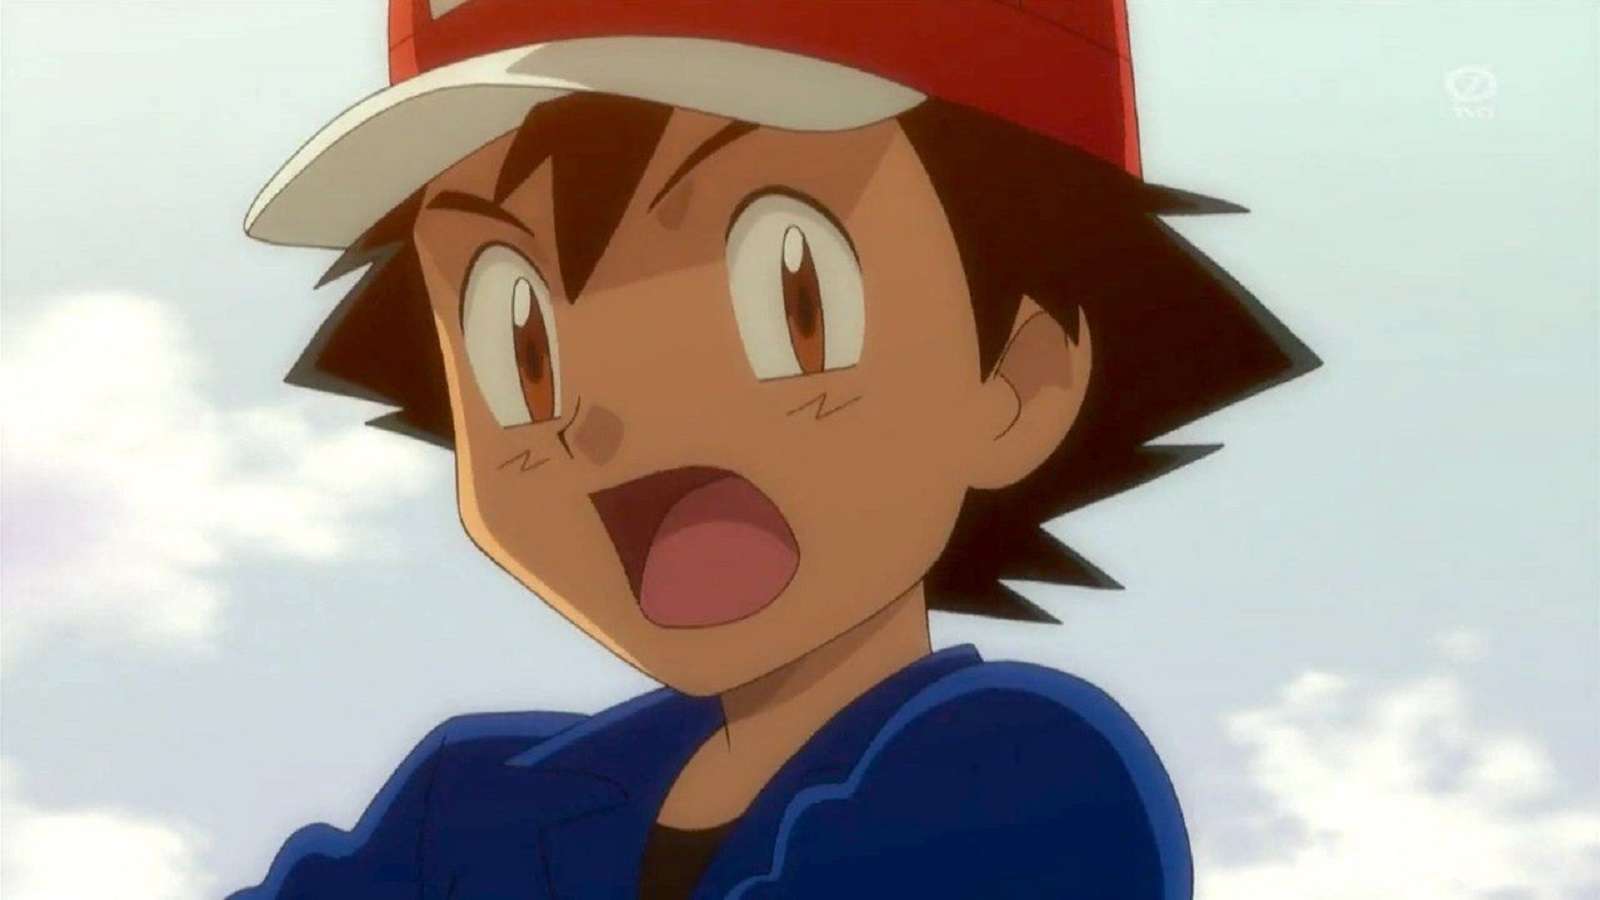 Pokemon Anime Could Be In Trouble According to leaks